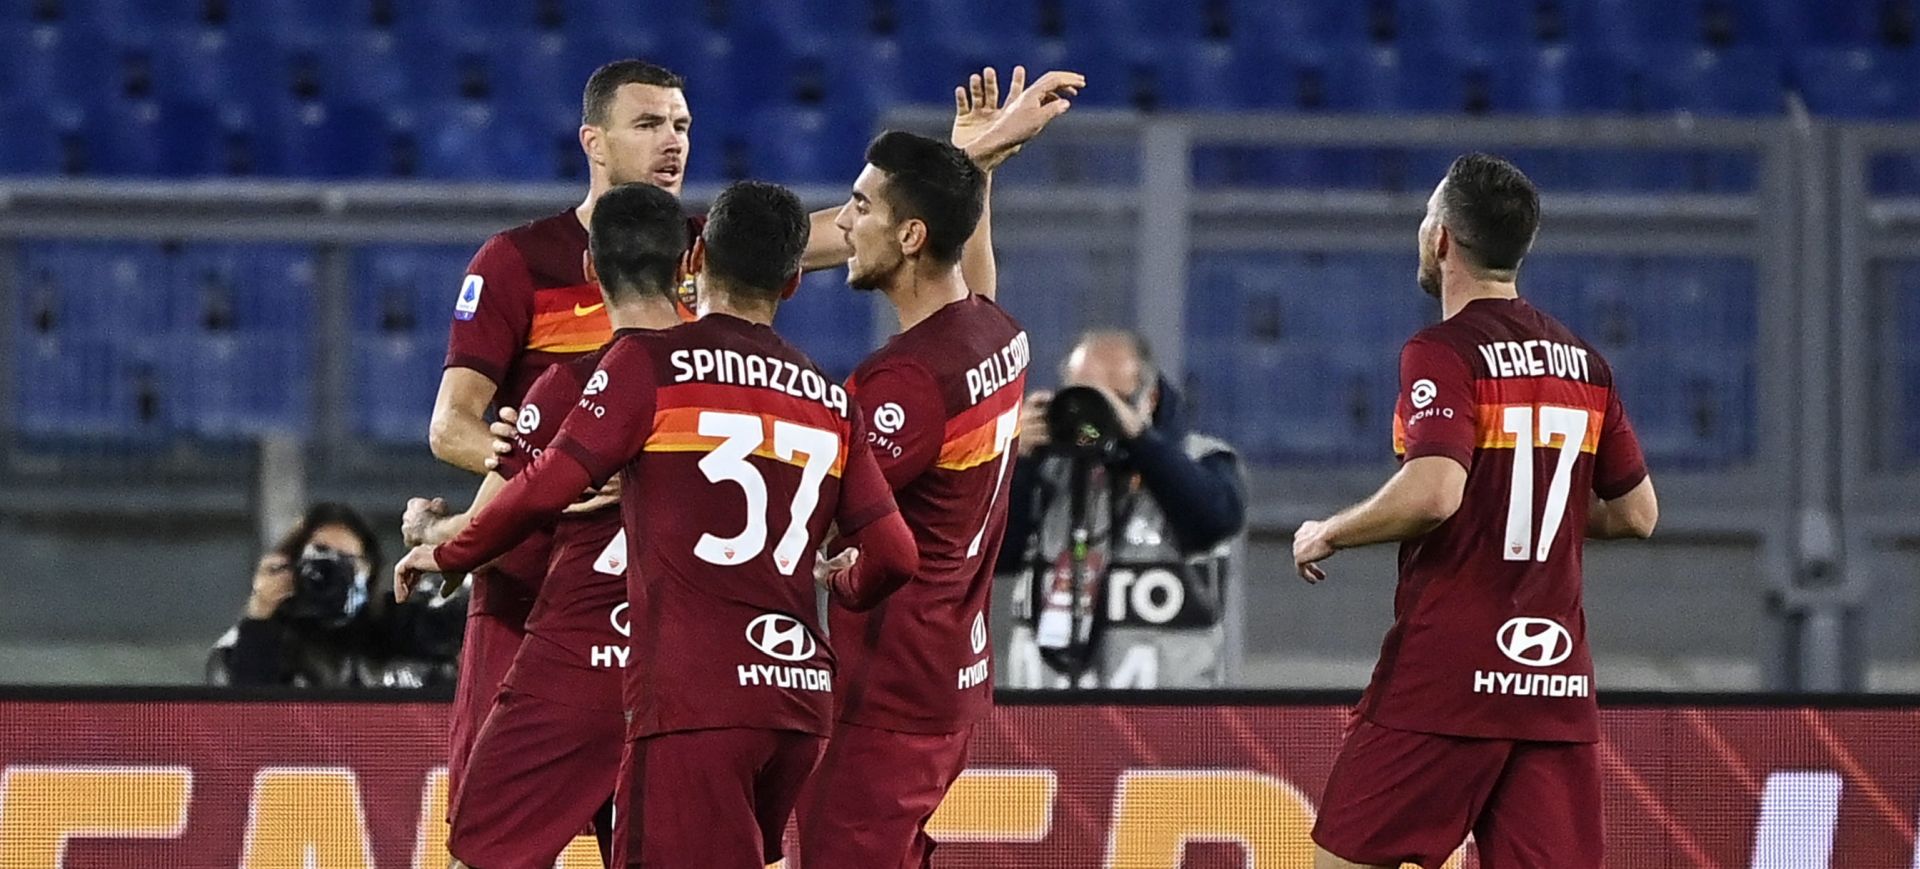 epa08756266 Roma's Edin Dzeko (L) celebrates with teammates after scoring the 2-1 lead during the Italian Serie A soccer match between AS Roma and Benevento Calcio at the Olimpico stadium in Rome, Italy, 18 October 2020.  EPA/Riccardo Antimiani